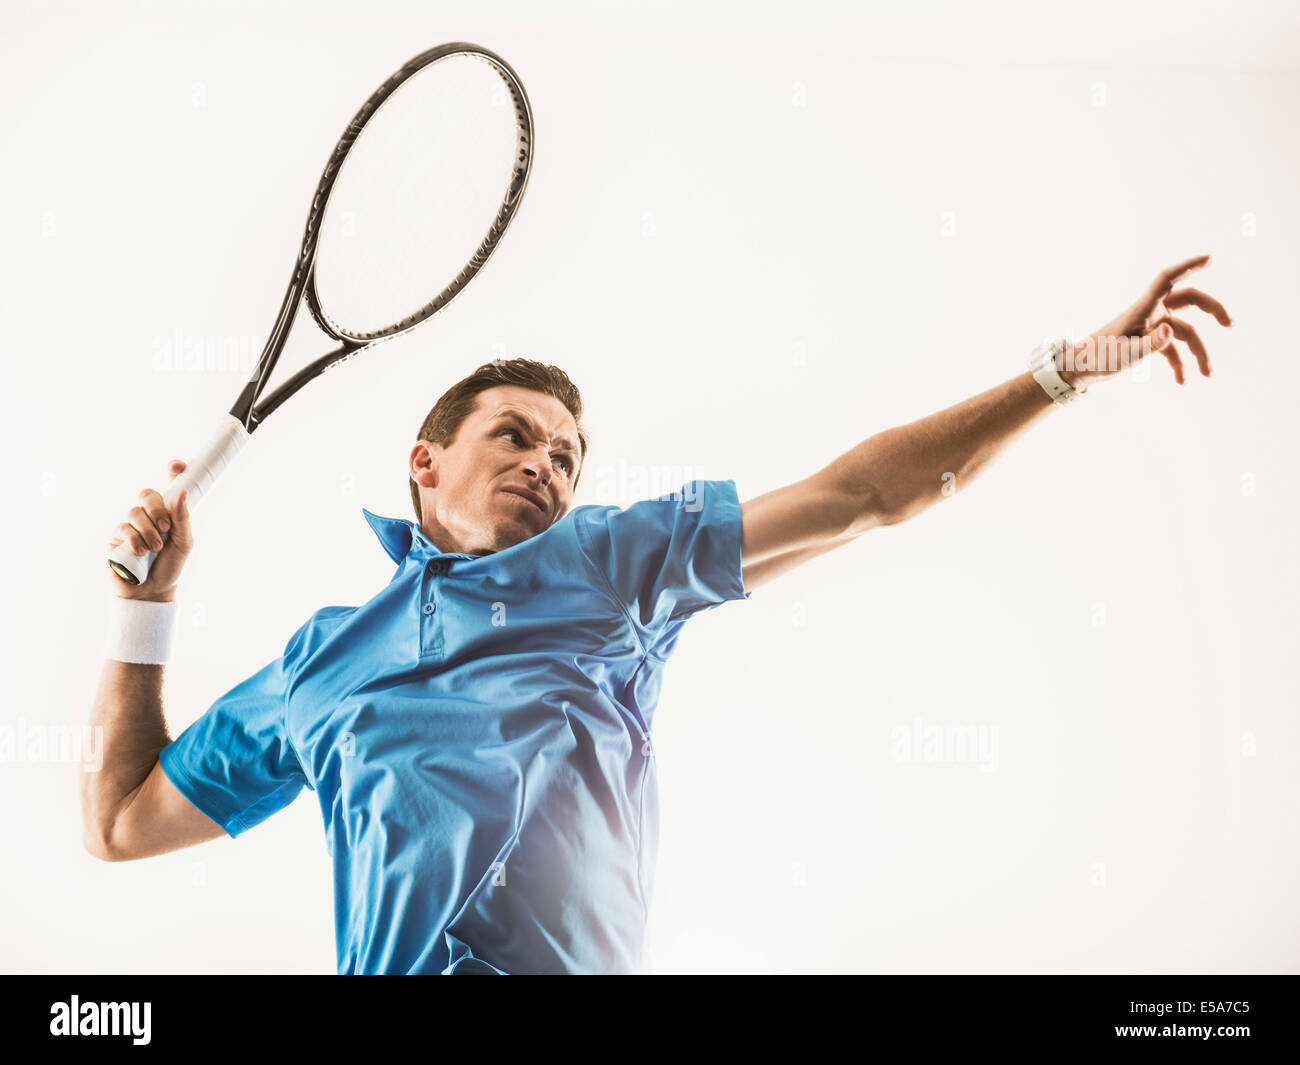 Young man playing tennis Banque D'Images